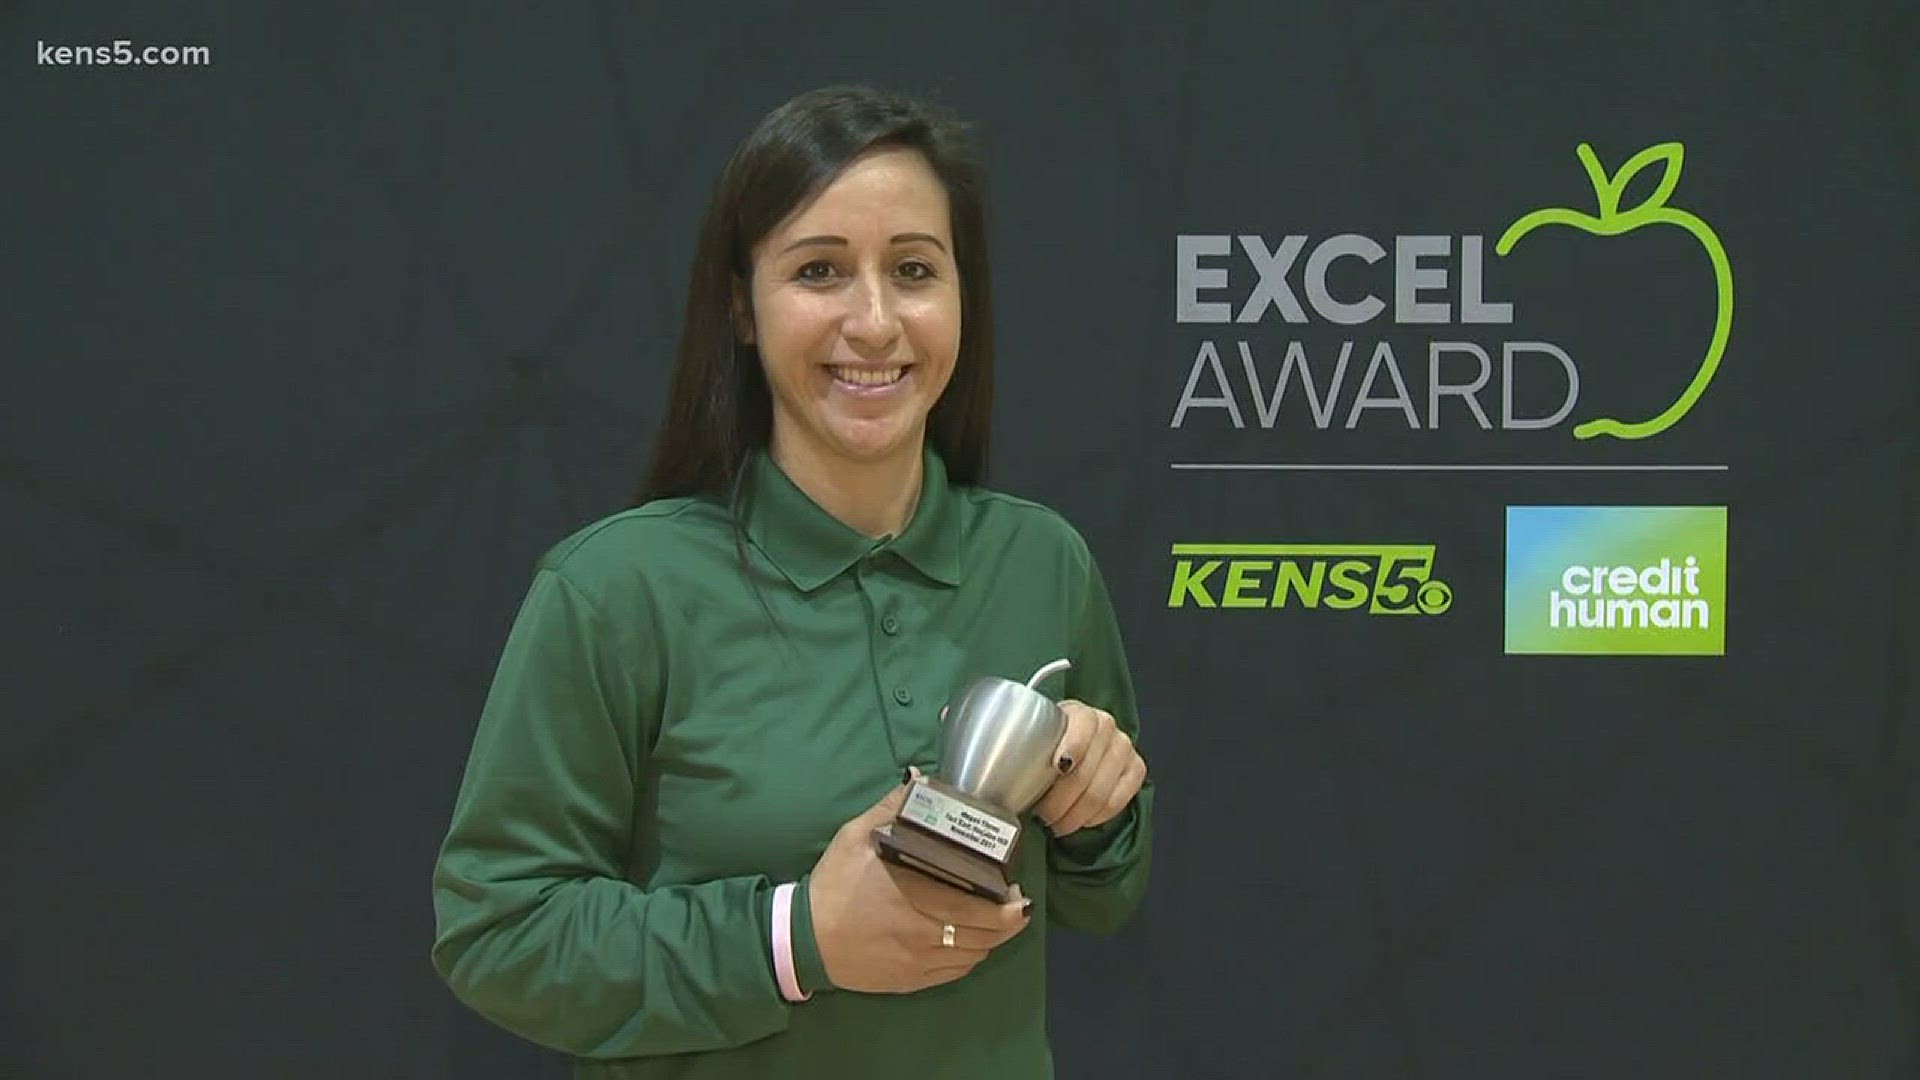 Megan Flores is the recipient of the KENS 5 Credit Human EXCEL Award for Ft. Sam Houston ISD.